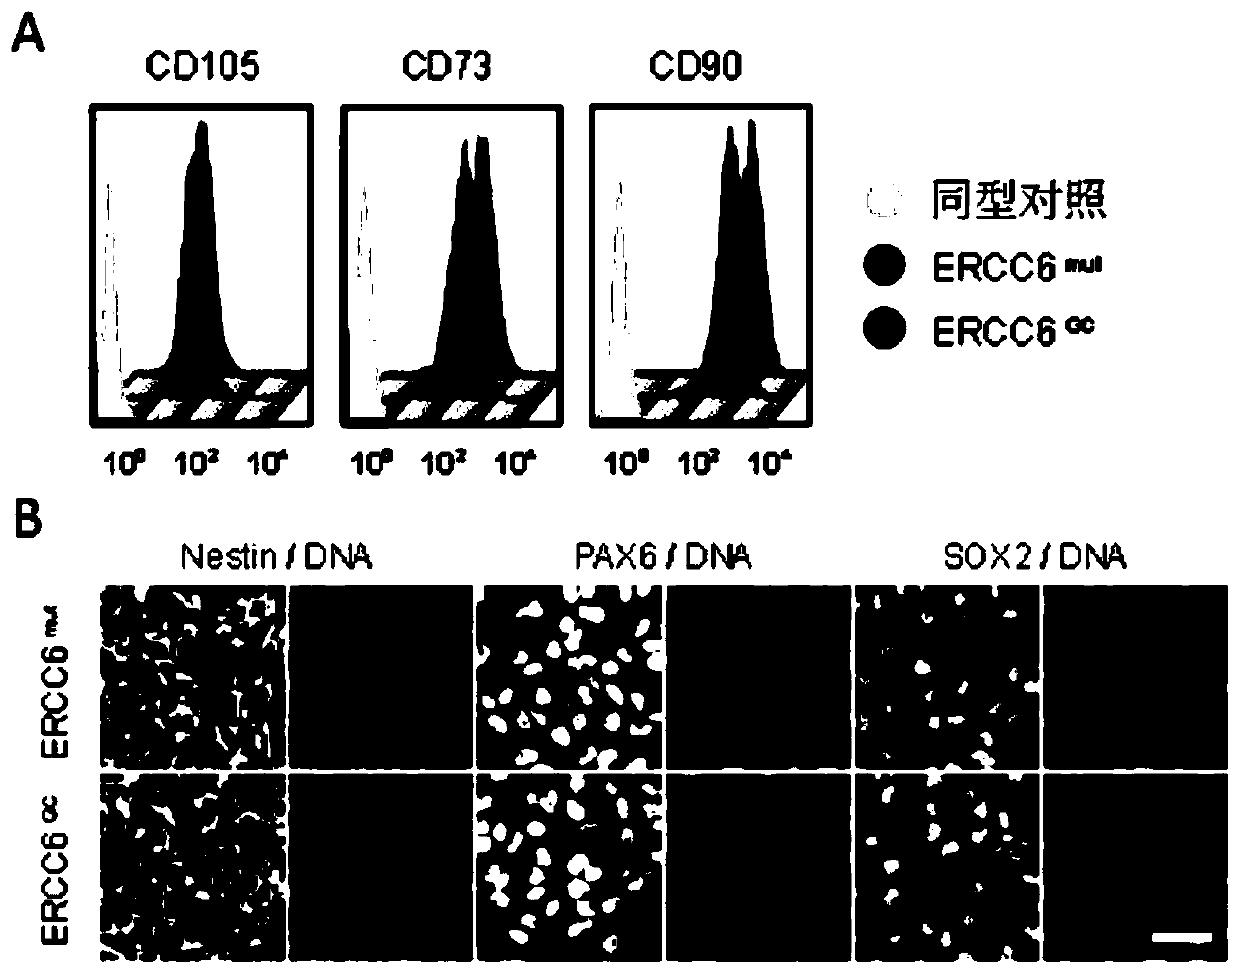 Making method of human cockayne syndrome specificity adult stem cells